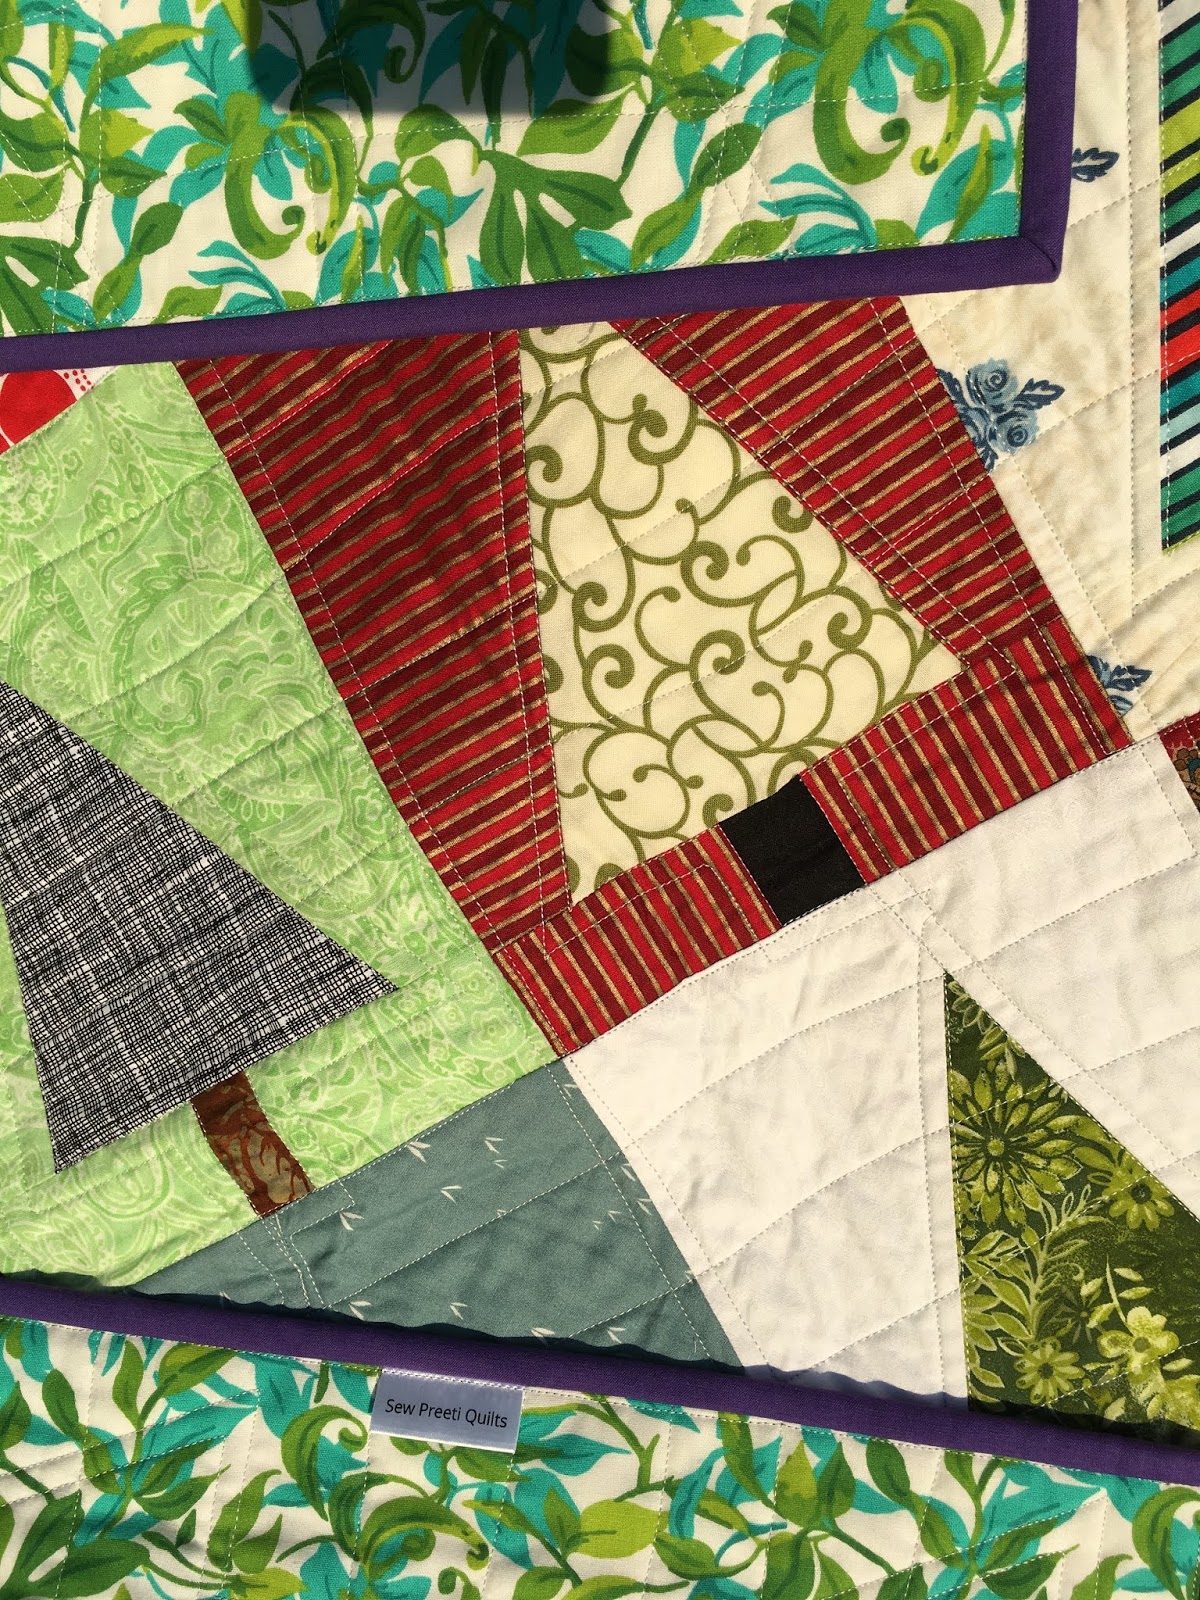 Sew Preeti Quilts: All Spruced Up